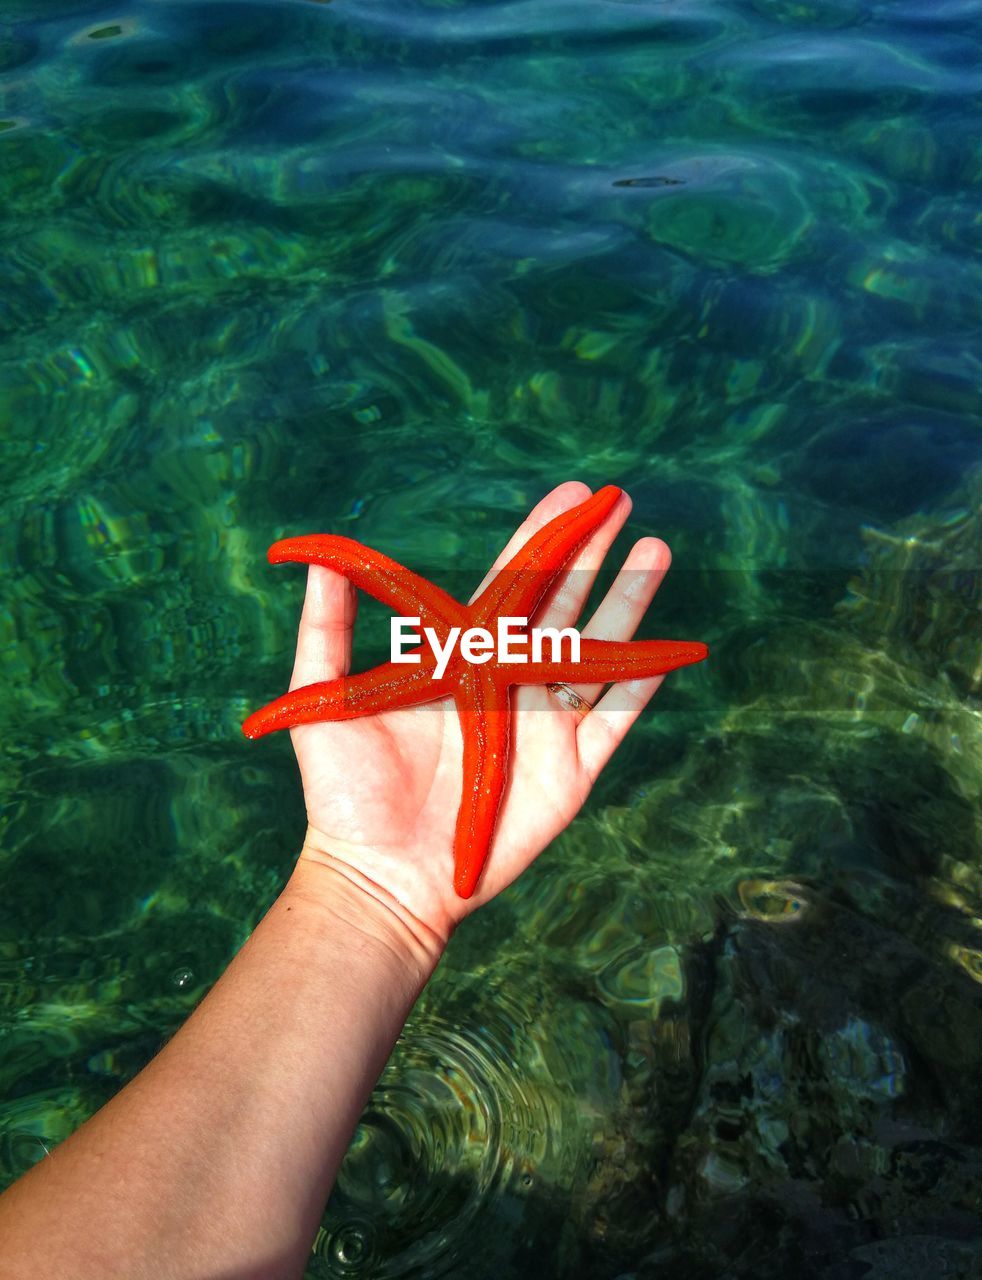 HIGH ANGLE VIEW OF PERSON HAND IN SEA WATER